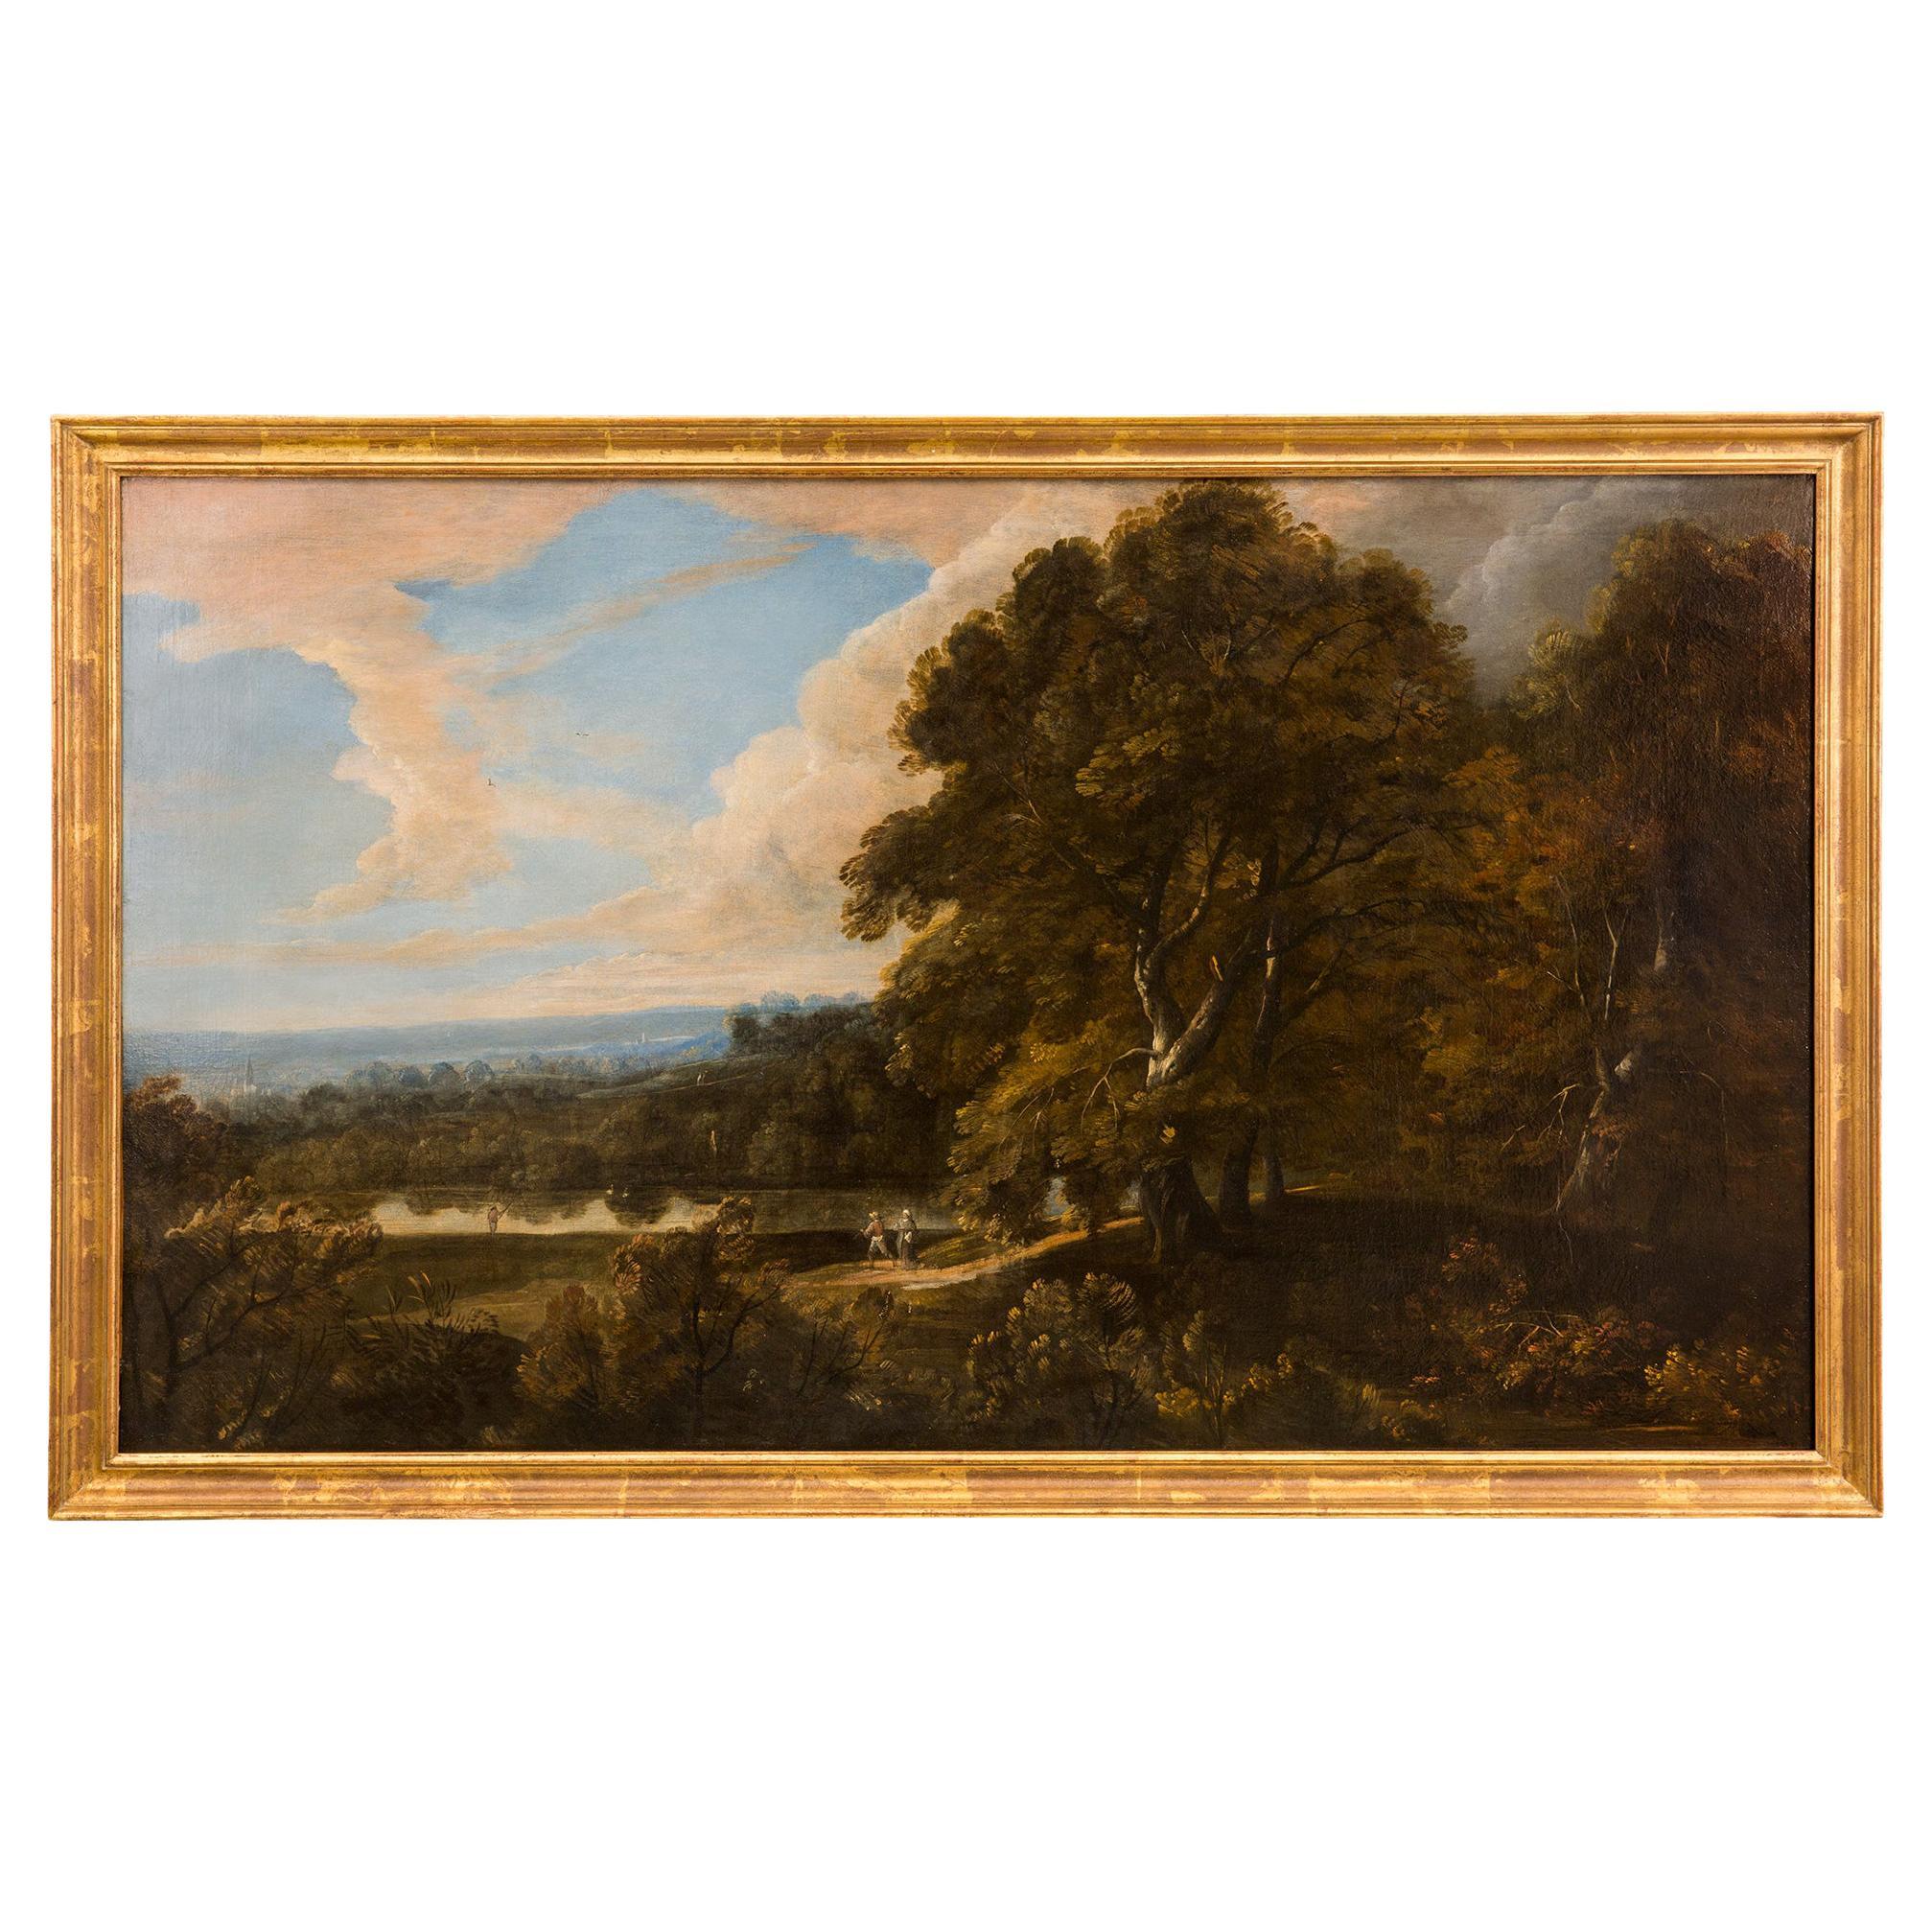 Dutch 18th Century Oil on Canvas Painting in a Giltwood Frame